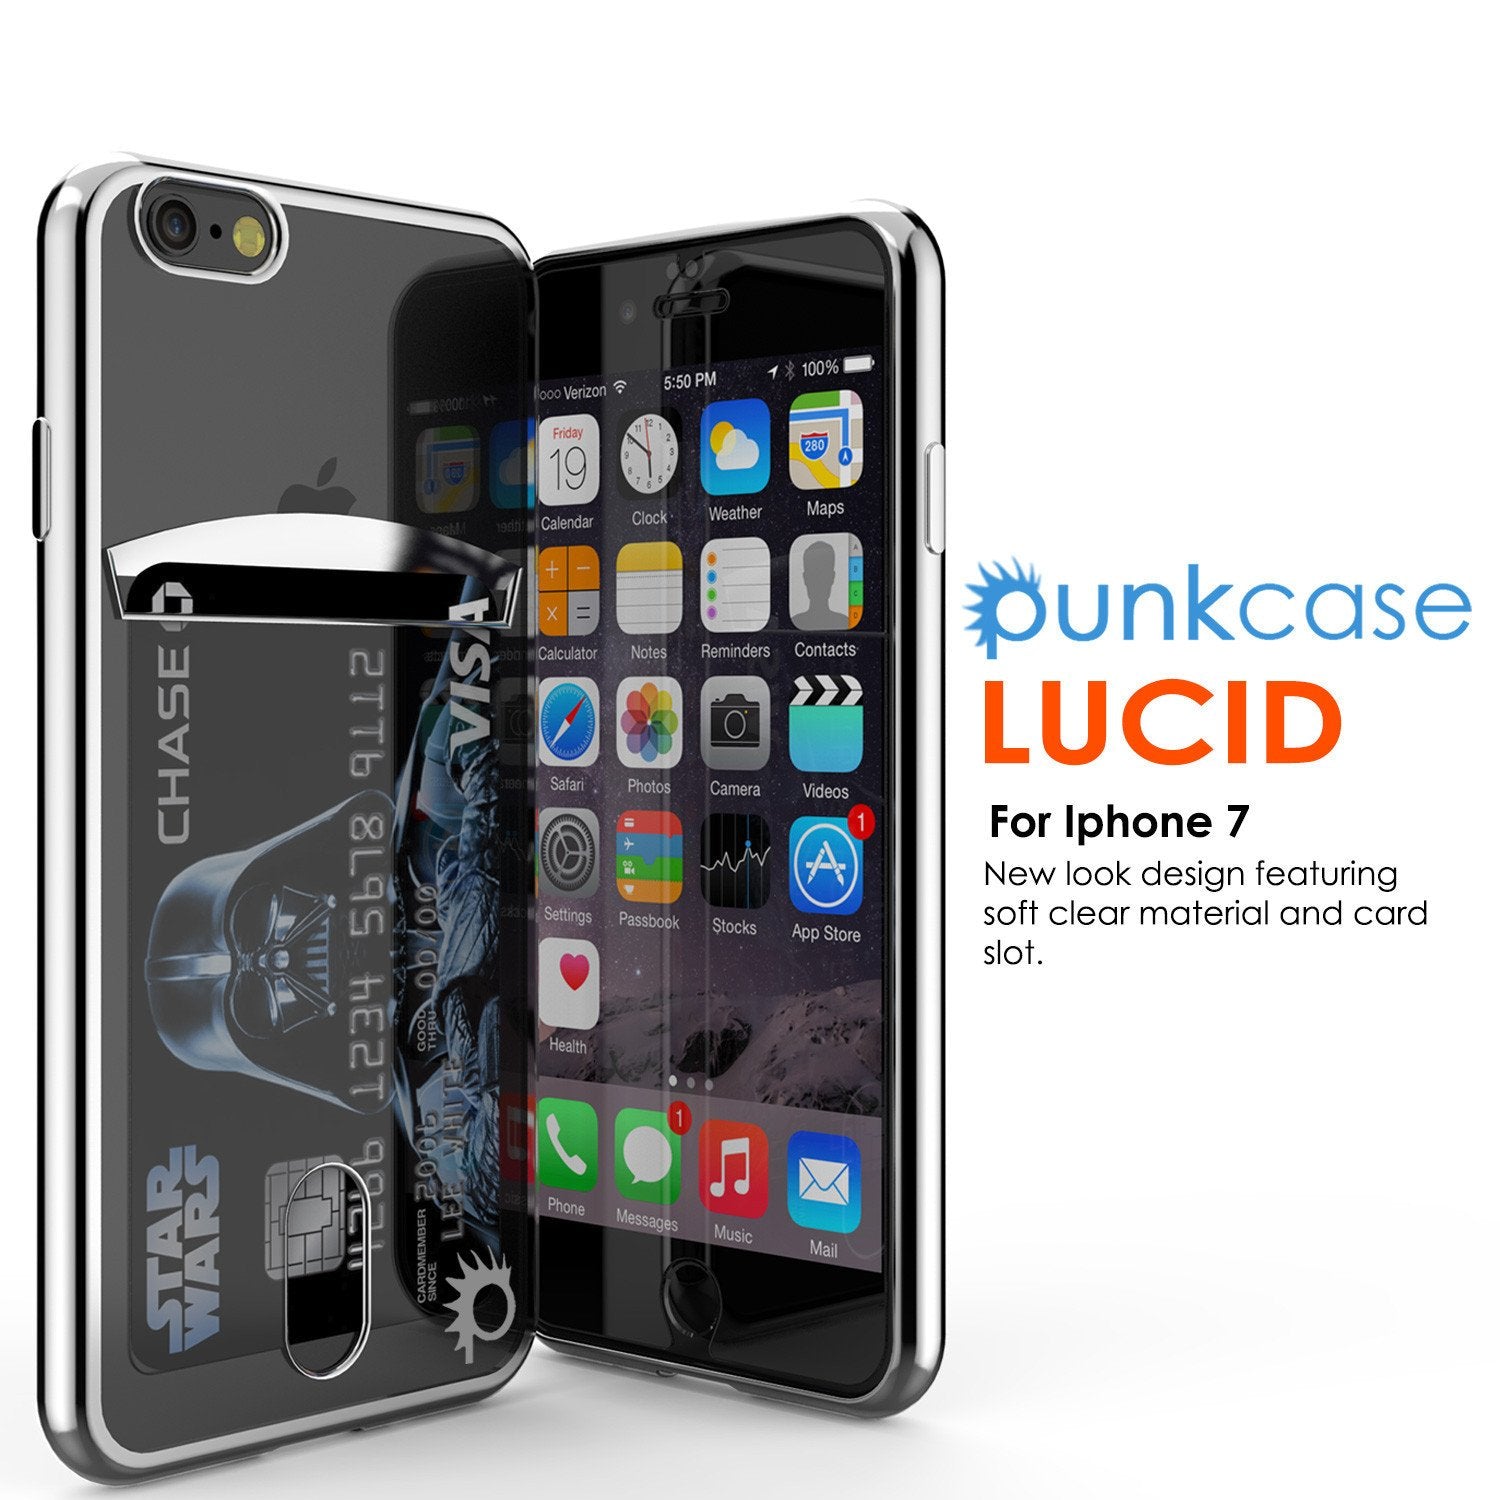 iPhone 7+ Plus Case, PUNKCASE® LUCID Silver Series for iPhone 7+ Plus Premium Impact Protective Armor Case Cover | Clear TPU | Lifetime Warranty Exchange | PUNK SHIELD Screen Protector | Ultra Fit